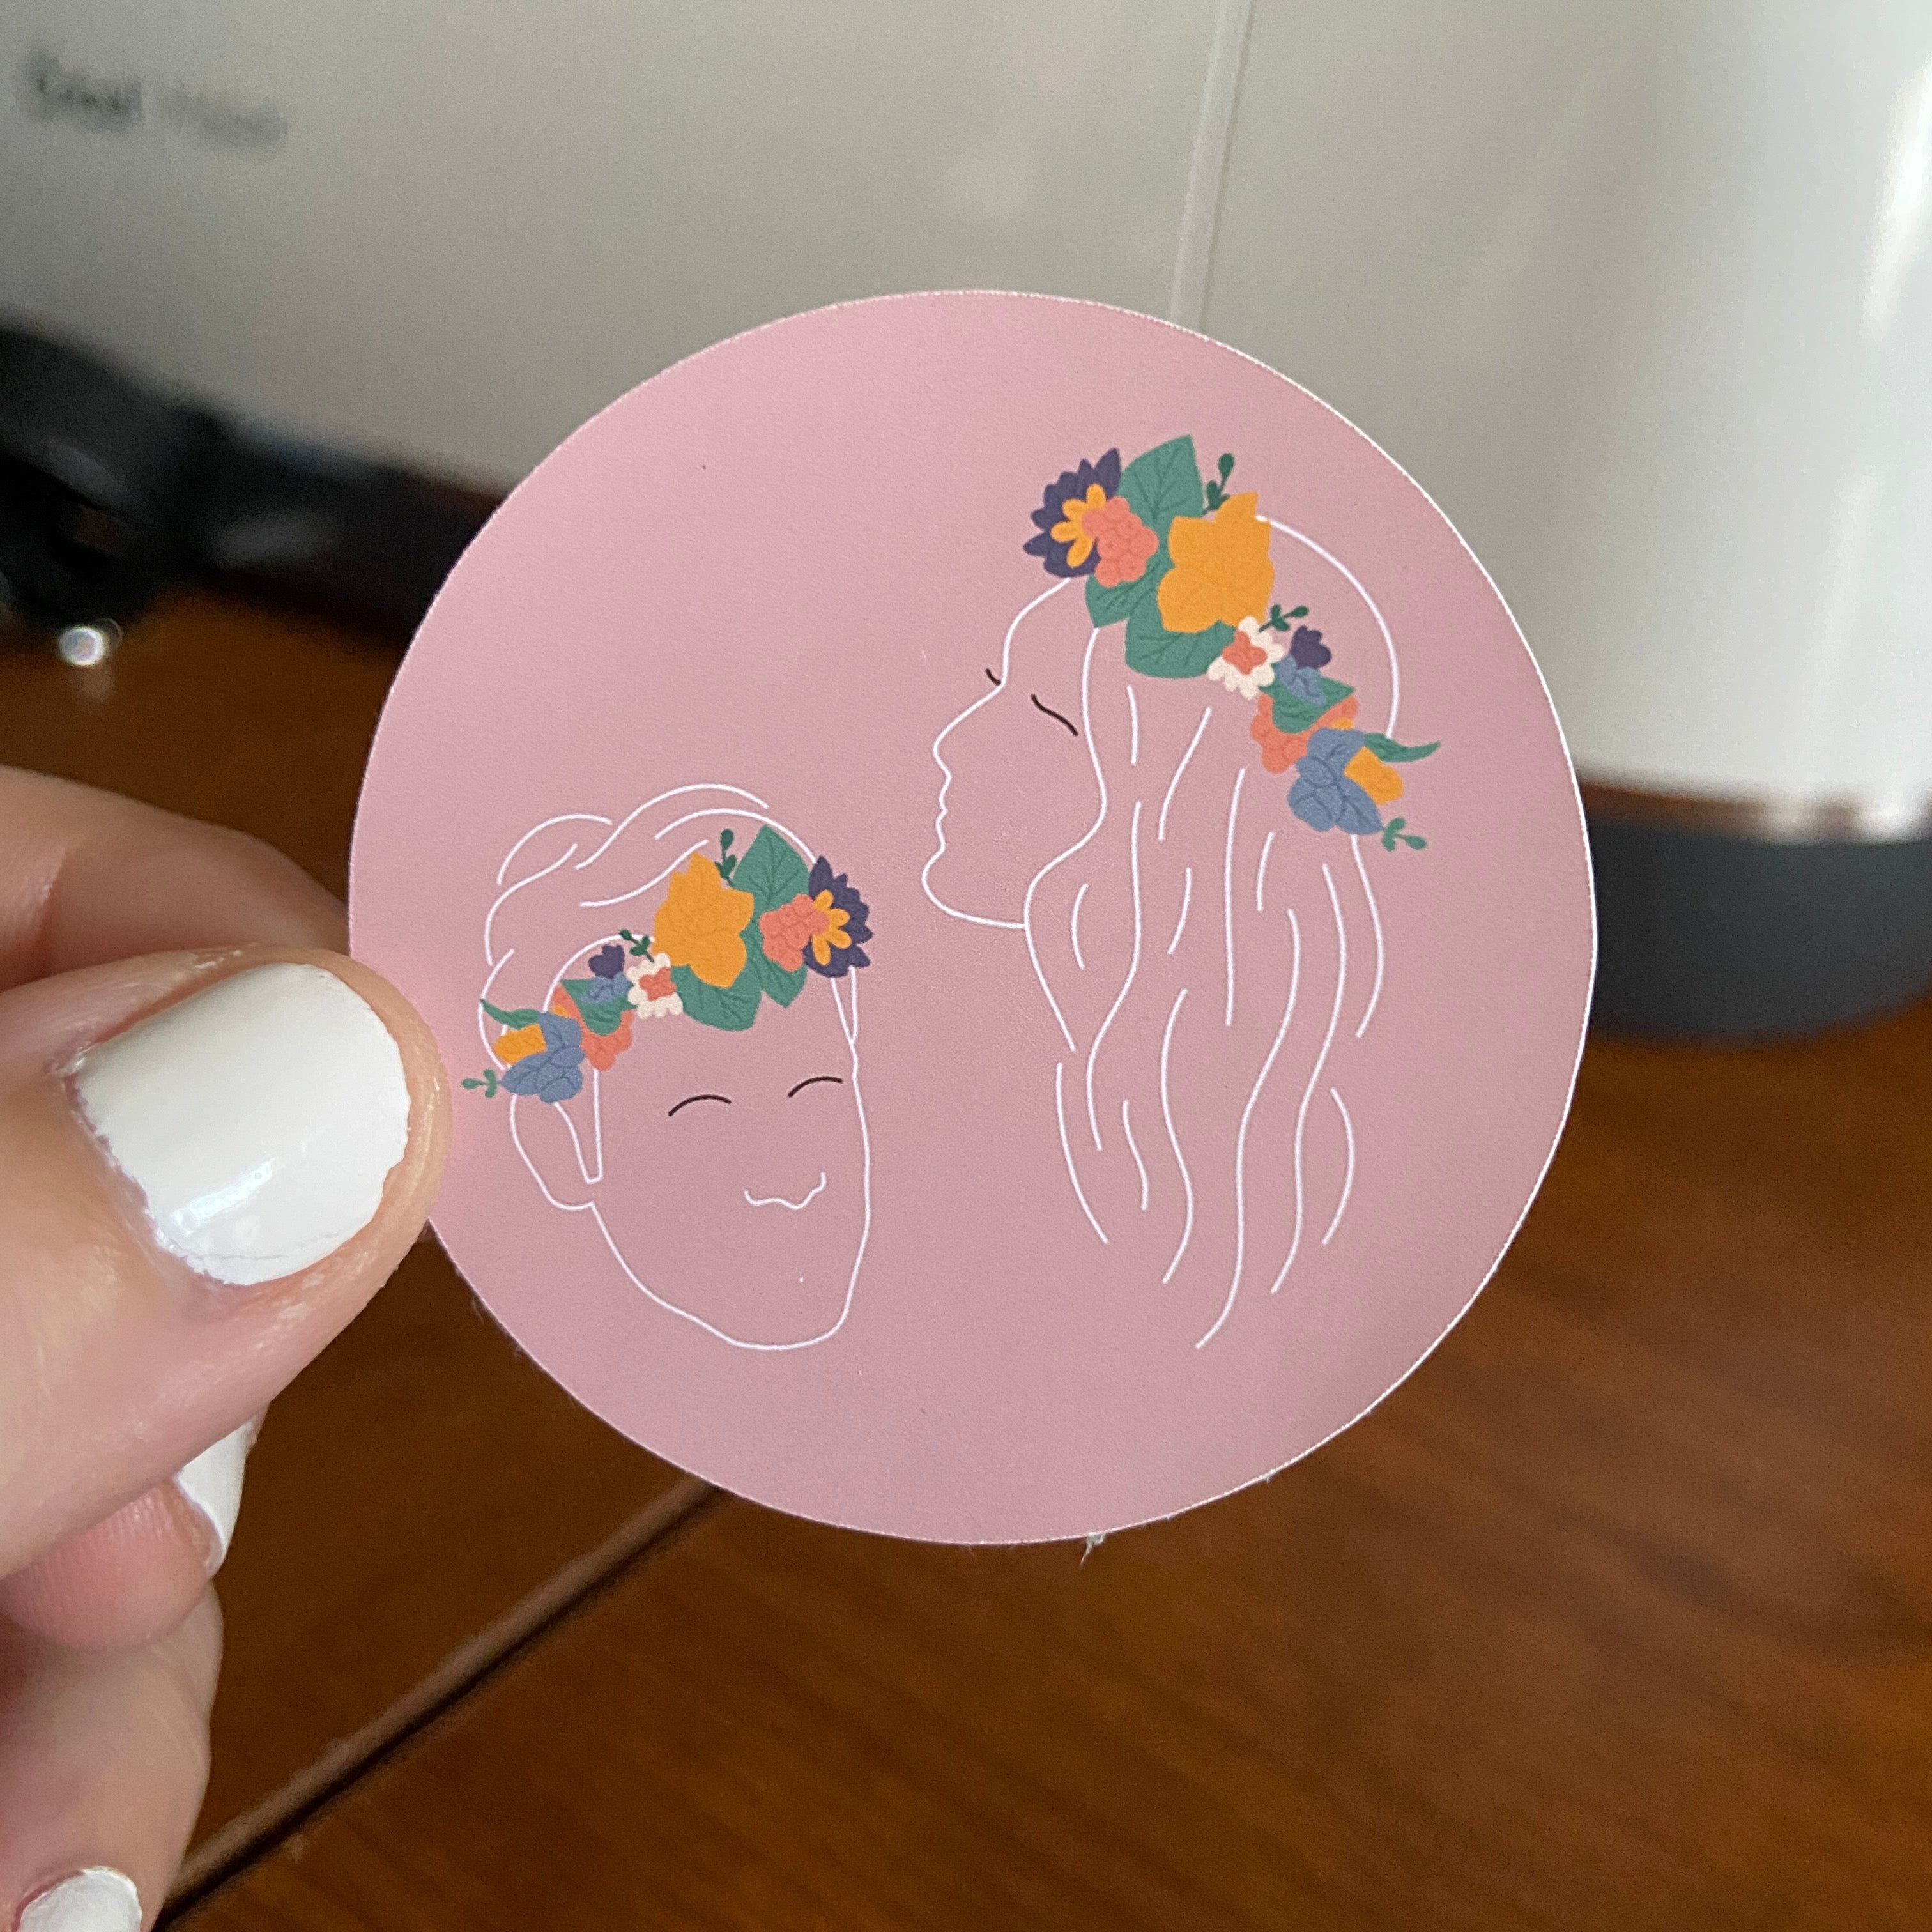 Taylor Swift Inspired Stickers